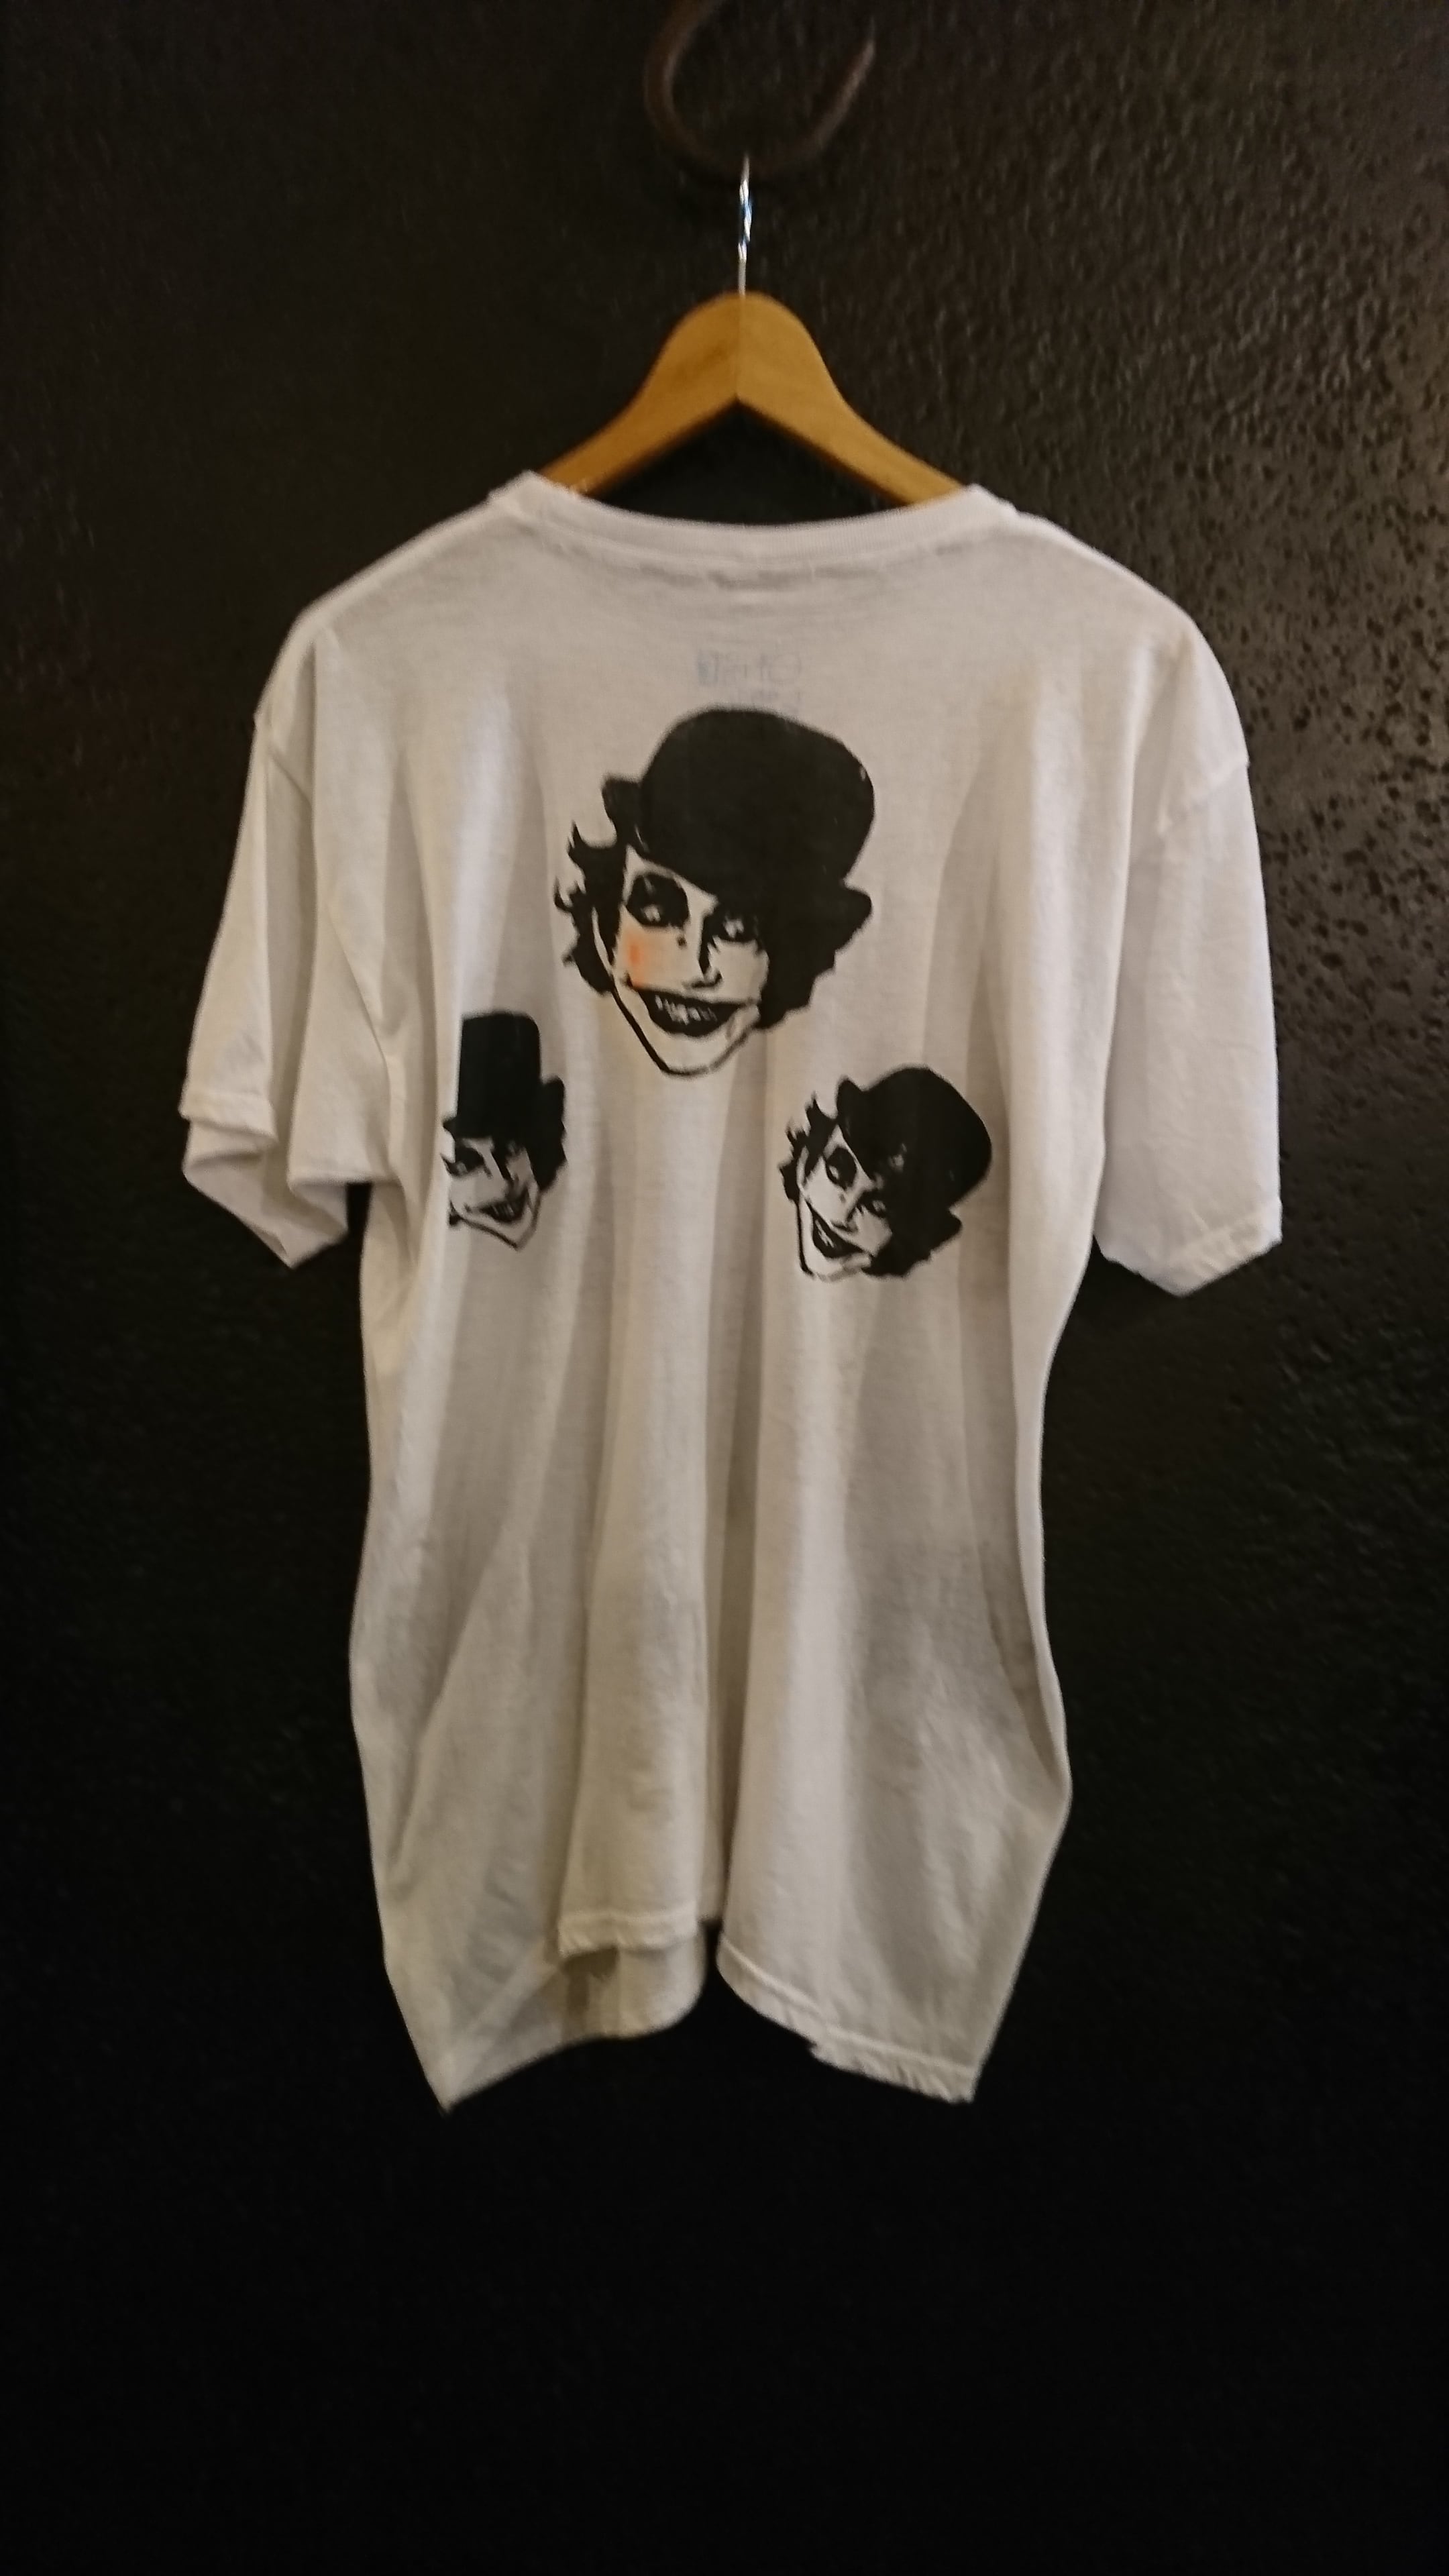 Otis and biscuits ヴィンテージ Tシャツ80’s